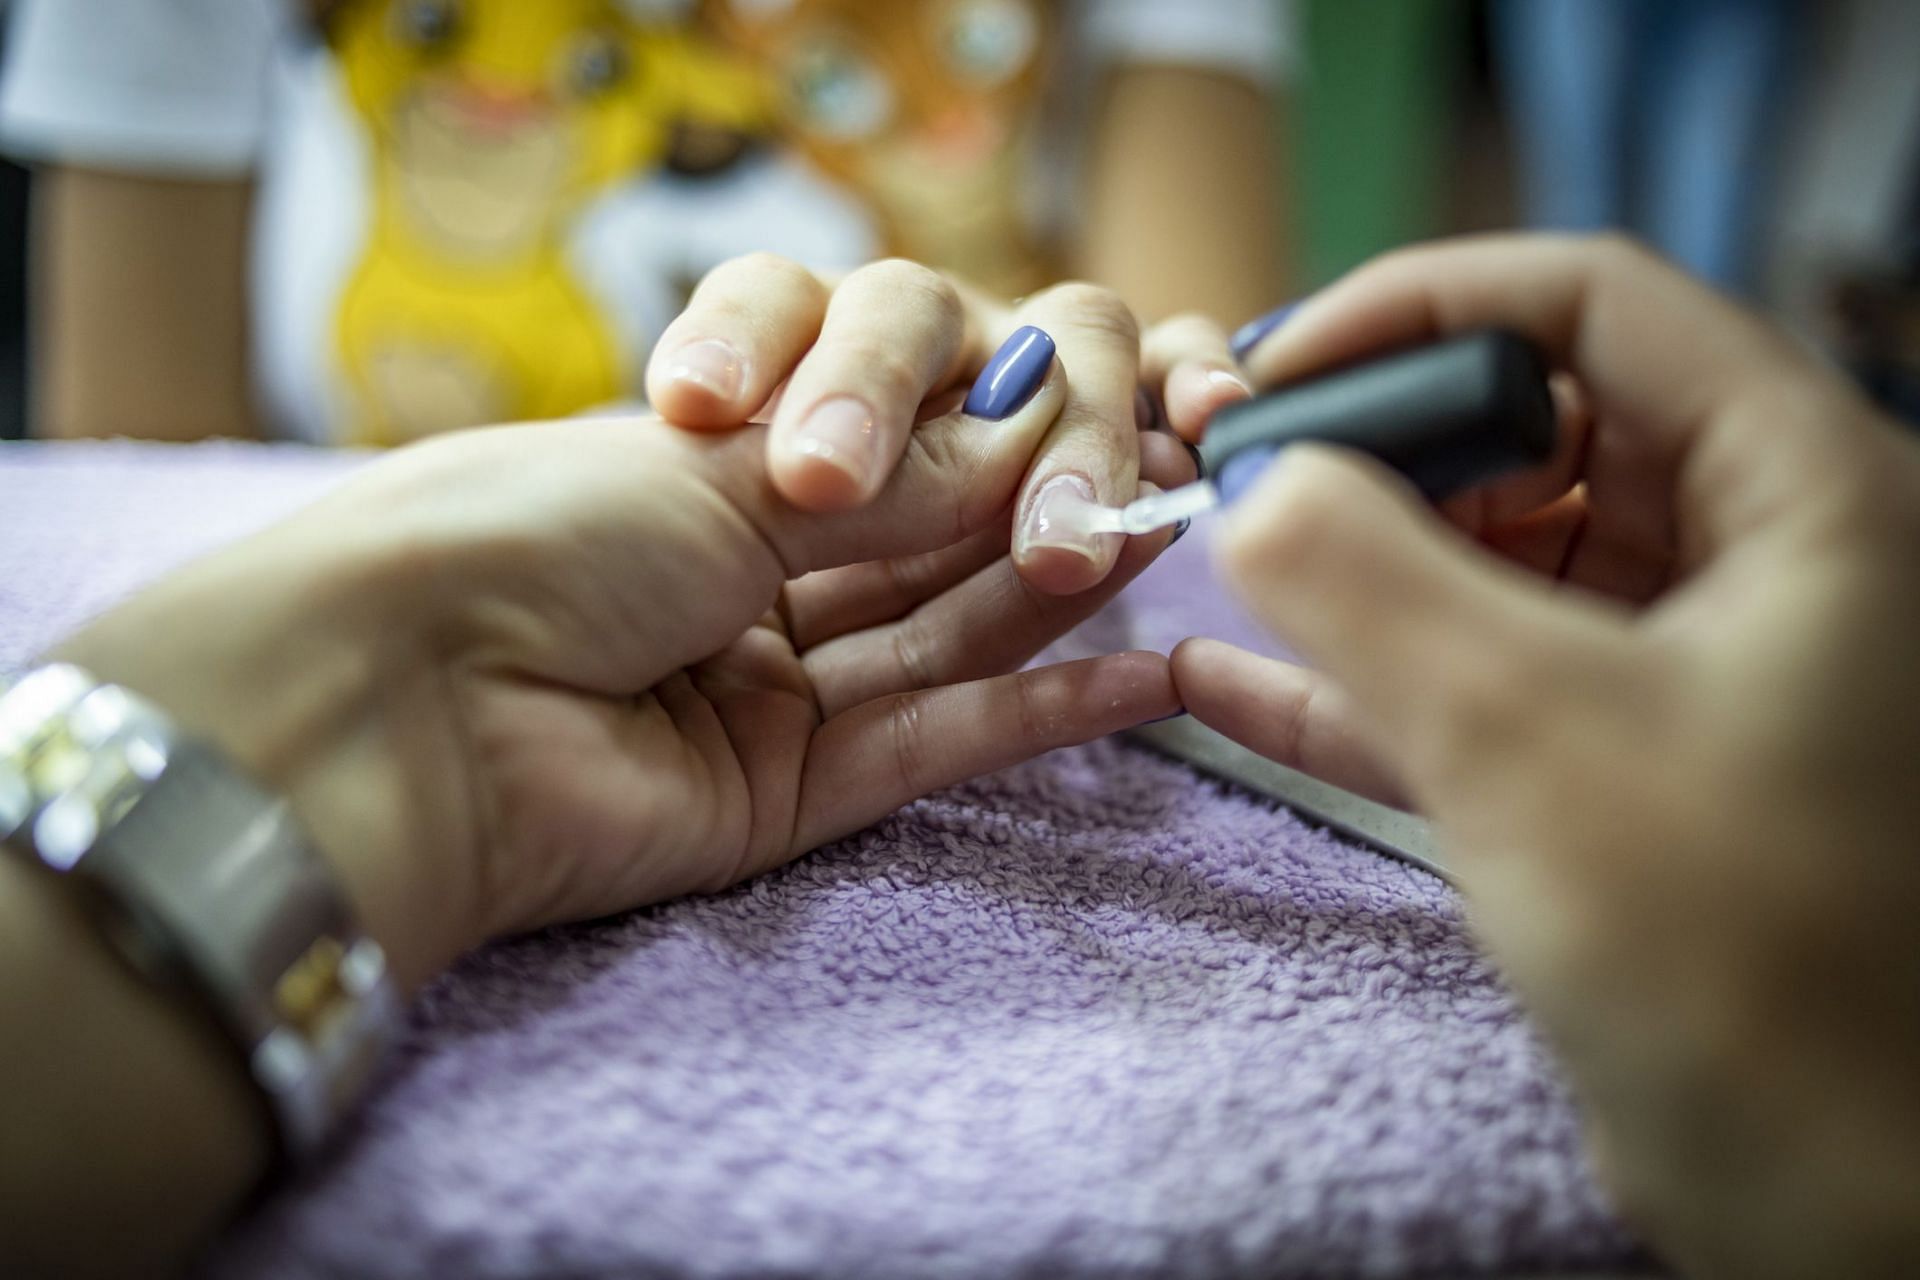 How to get nail glue off skin (Image via Getty Image/ Milan Markovic)